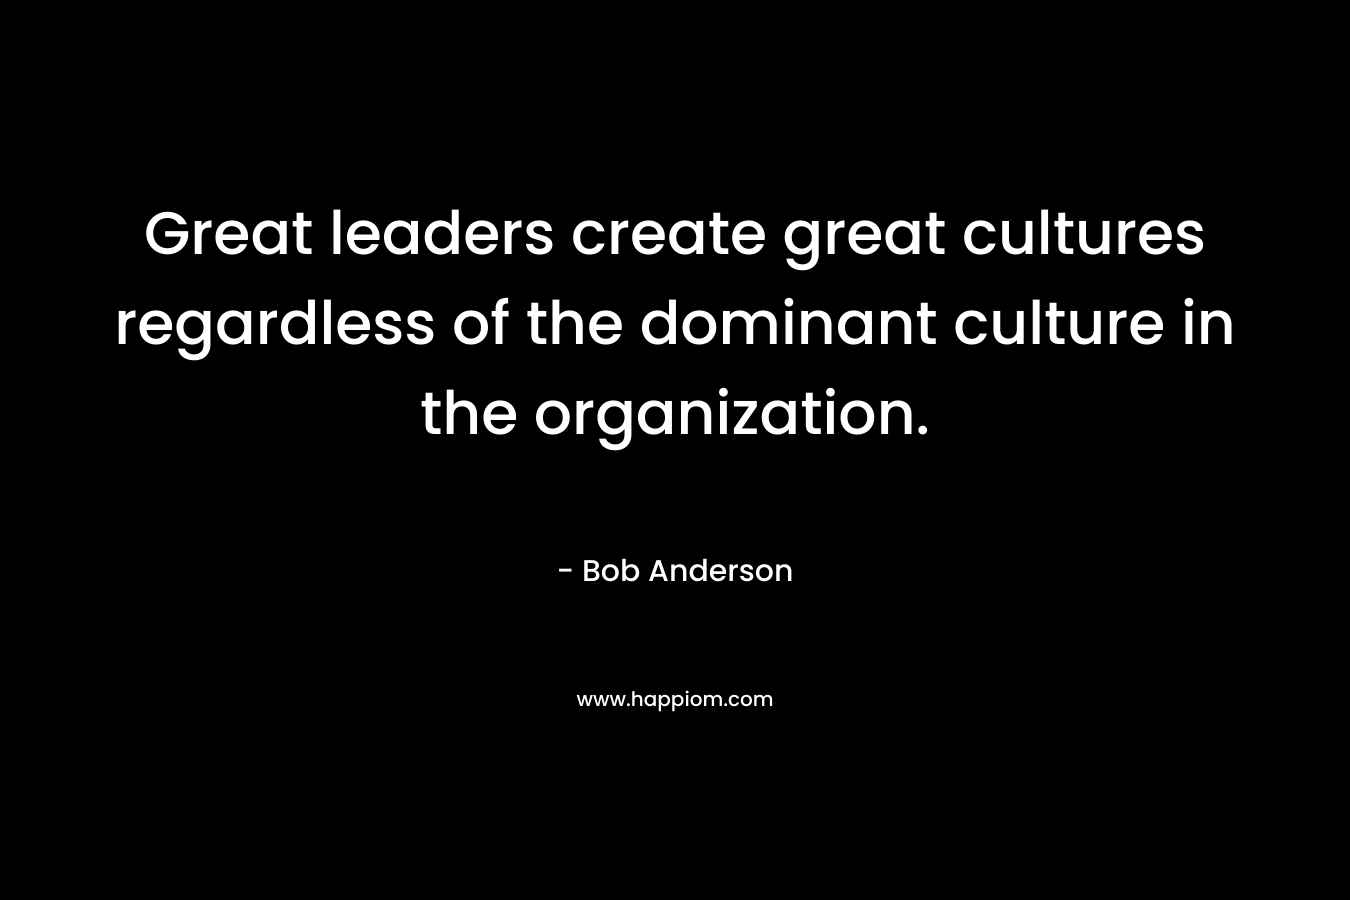 Great leaders create great cultures regardless of the dominant culture in the organization.